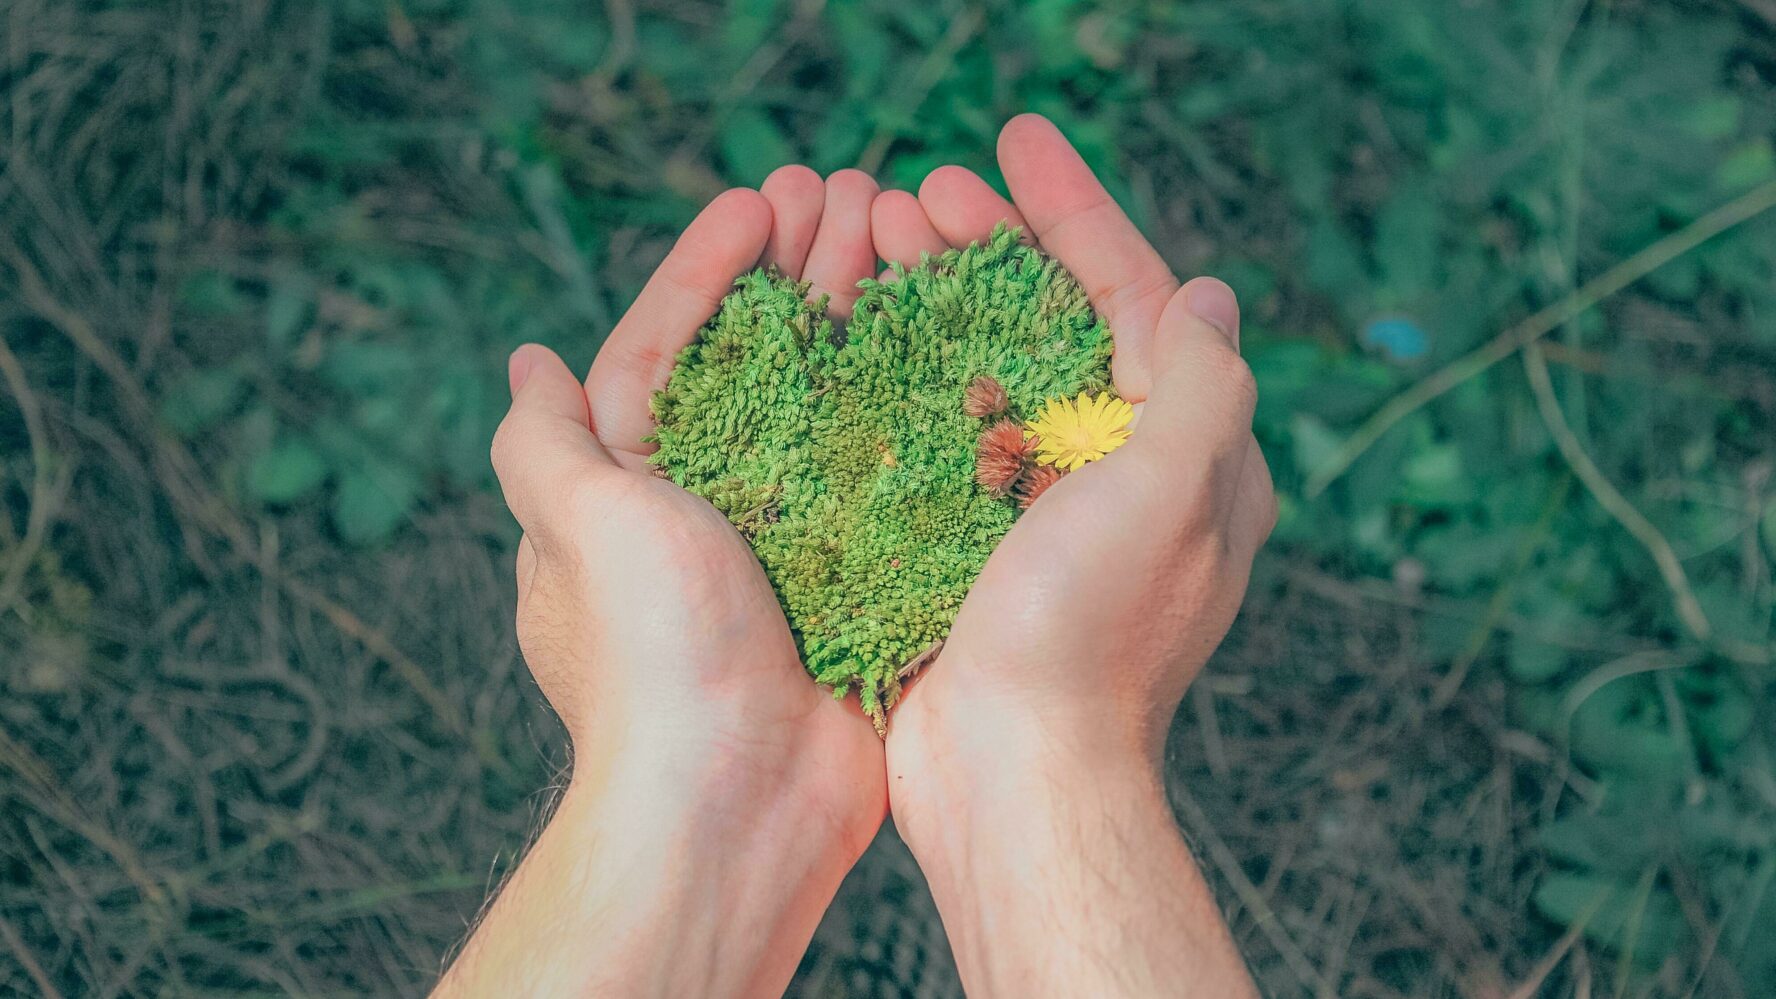 Two hands hold a clump of green moss in the shape of a heart